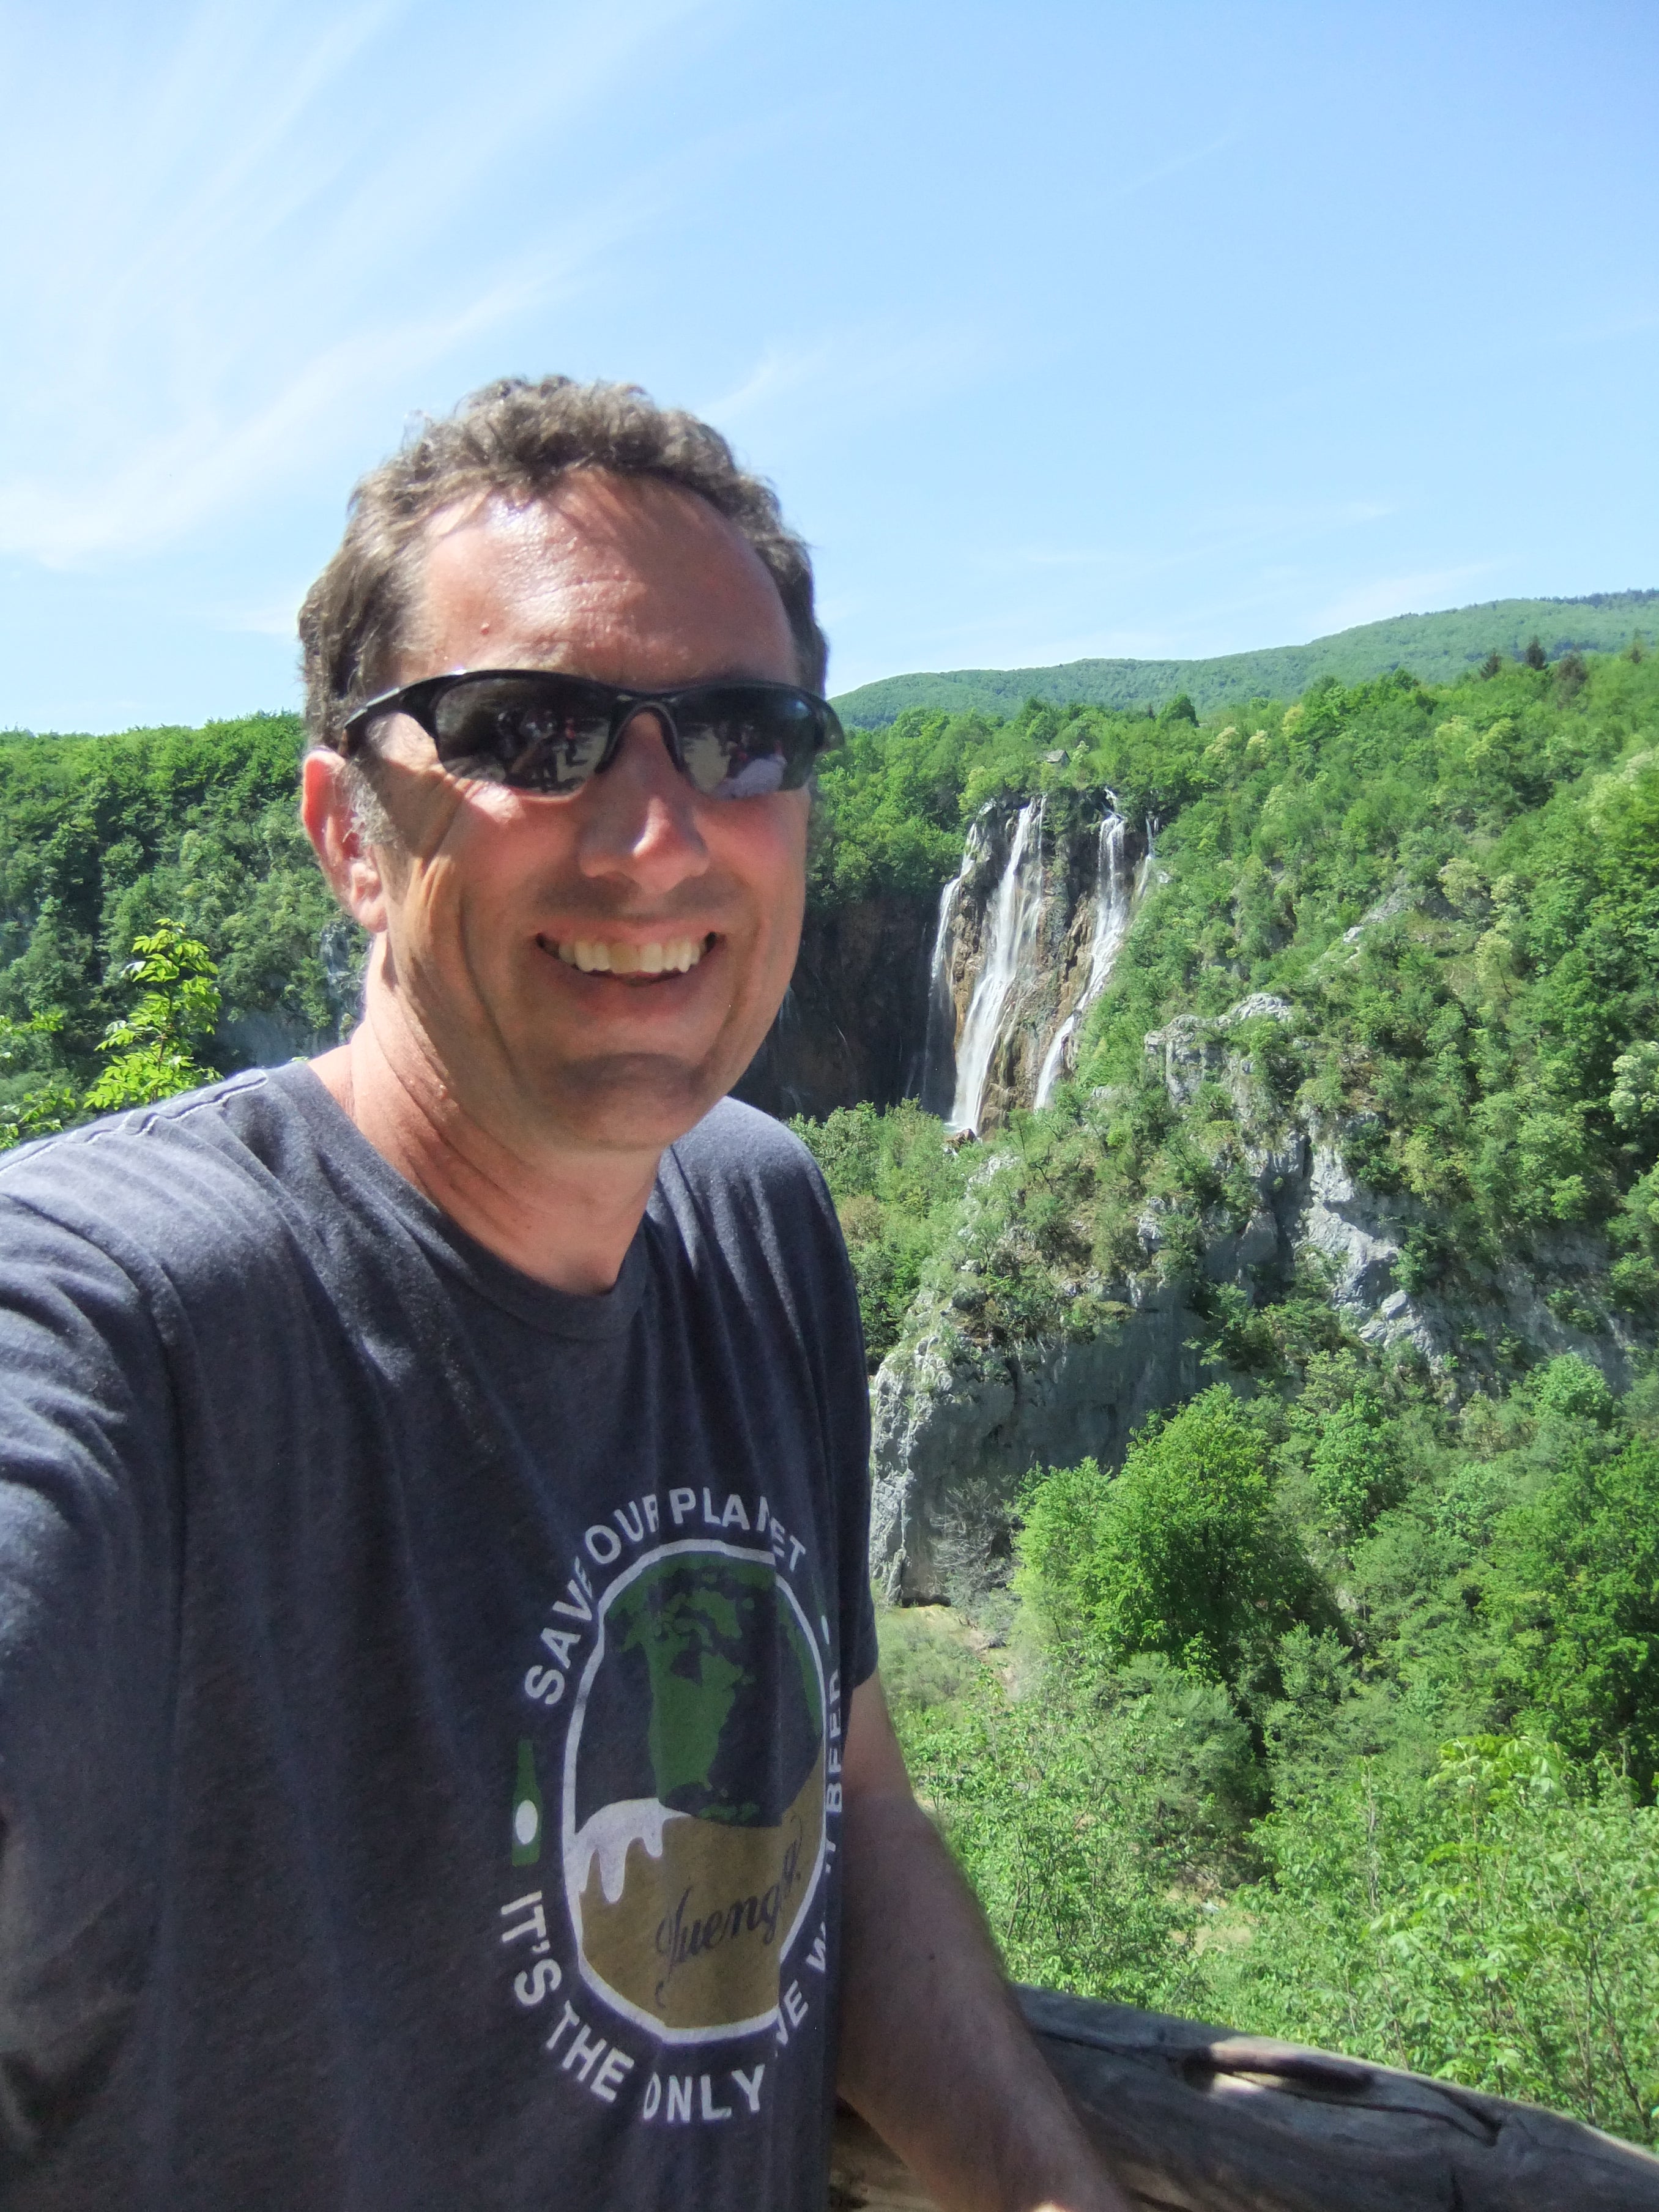 Nick Miller selfie portrait in front of a waterfall in a tropical climate.